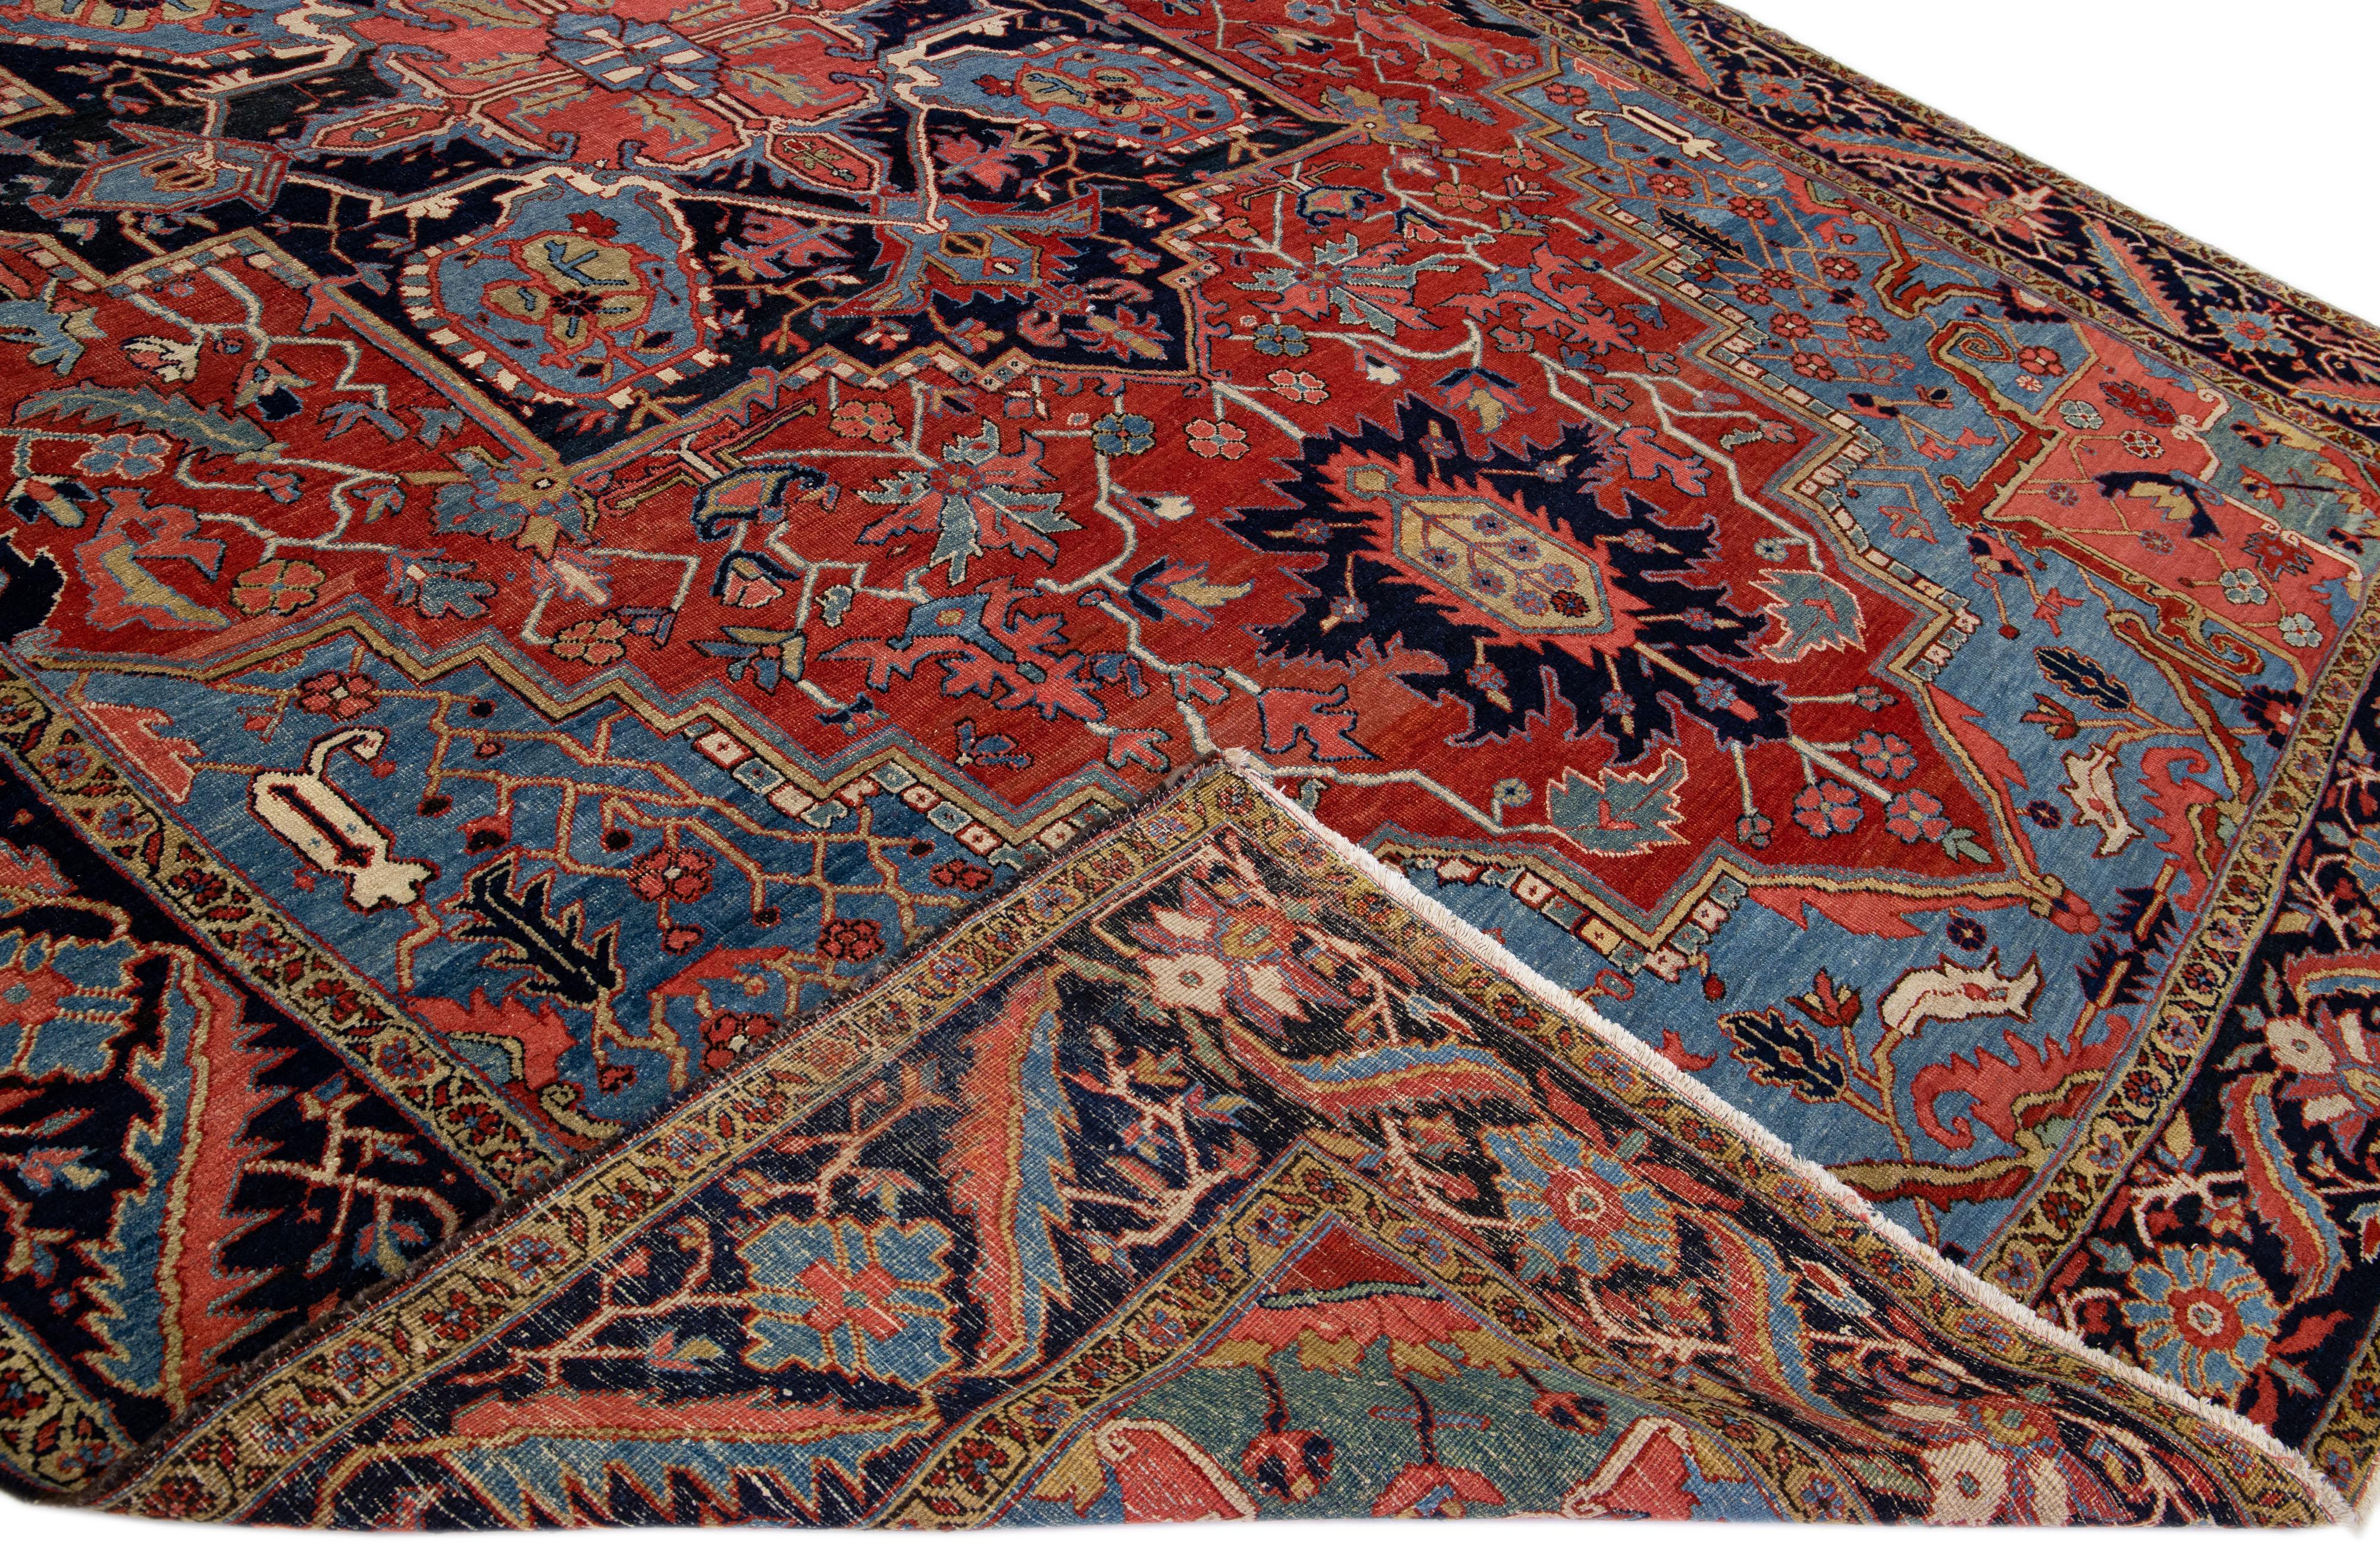 Beautiful antique Heriz hand-knotted oversized wool rug with a red and blue field. This Heriz rug has multi-color accents in a gorgeous all-over medallion floral design.

This rug measures: 11'9